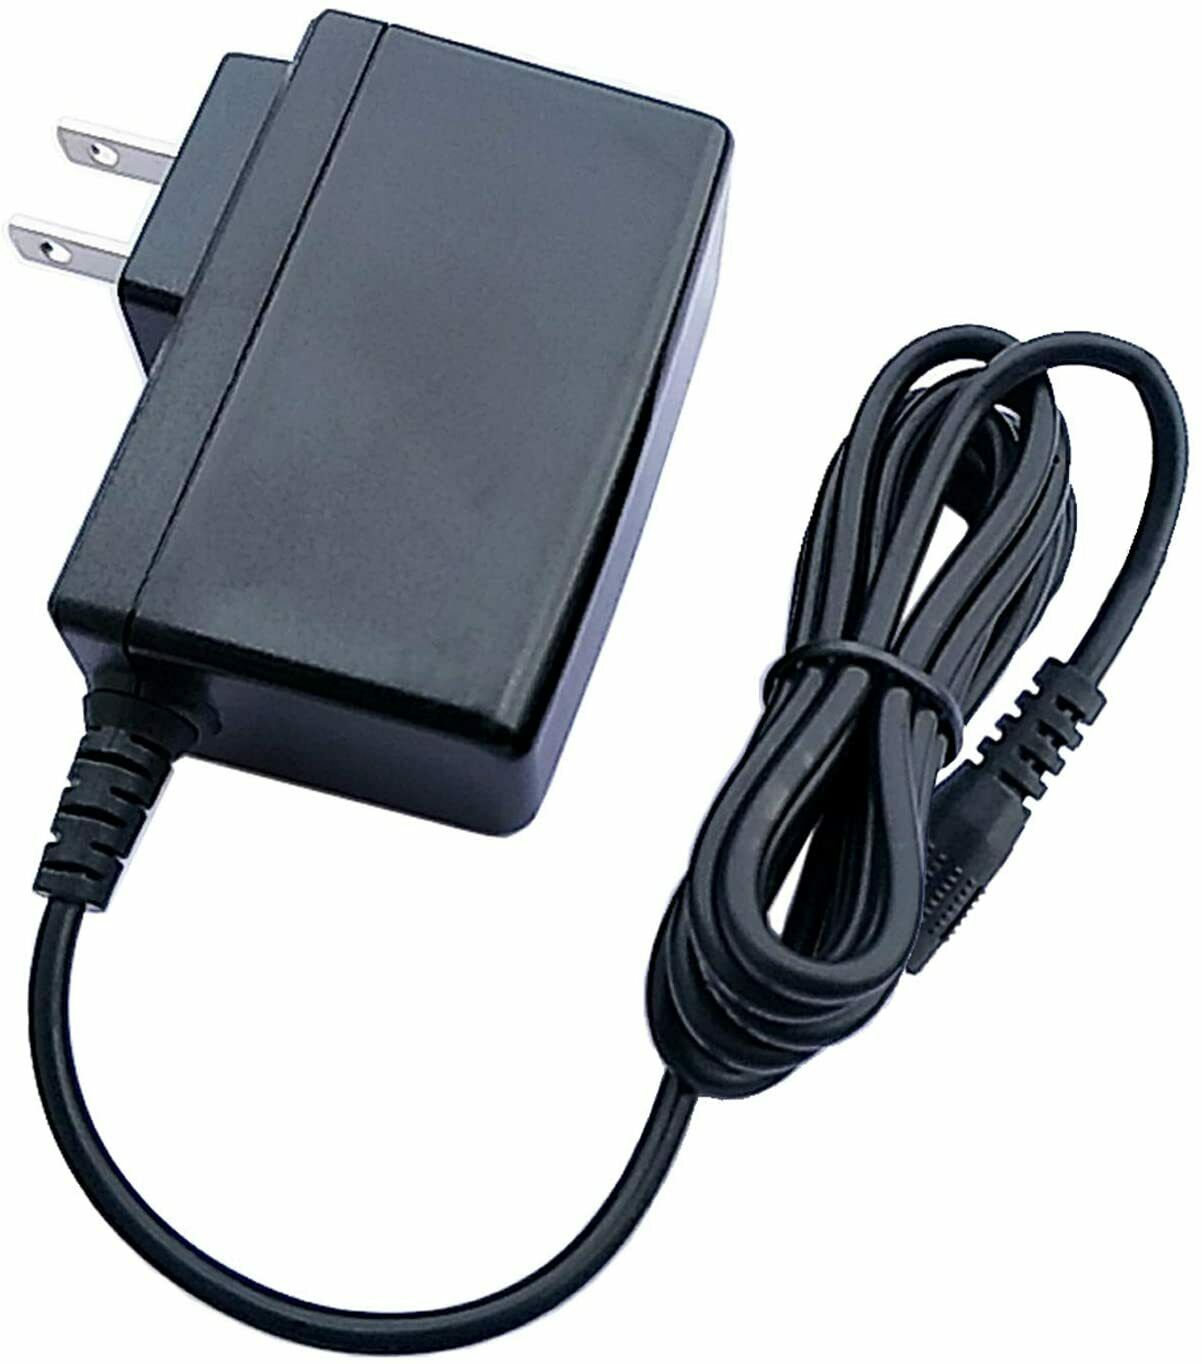 AC/DC Adapter Charger for WowWee CHiP Robot Toy Dog - Smartbed Power Supply Cord